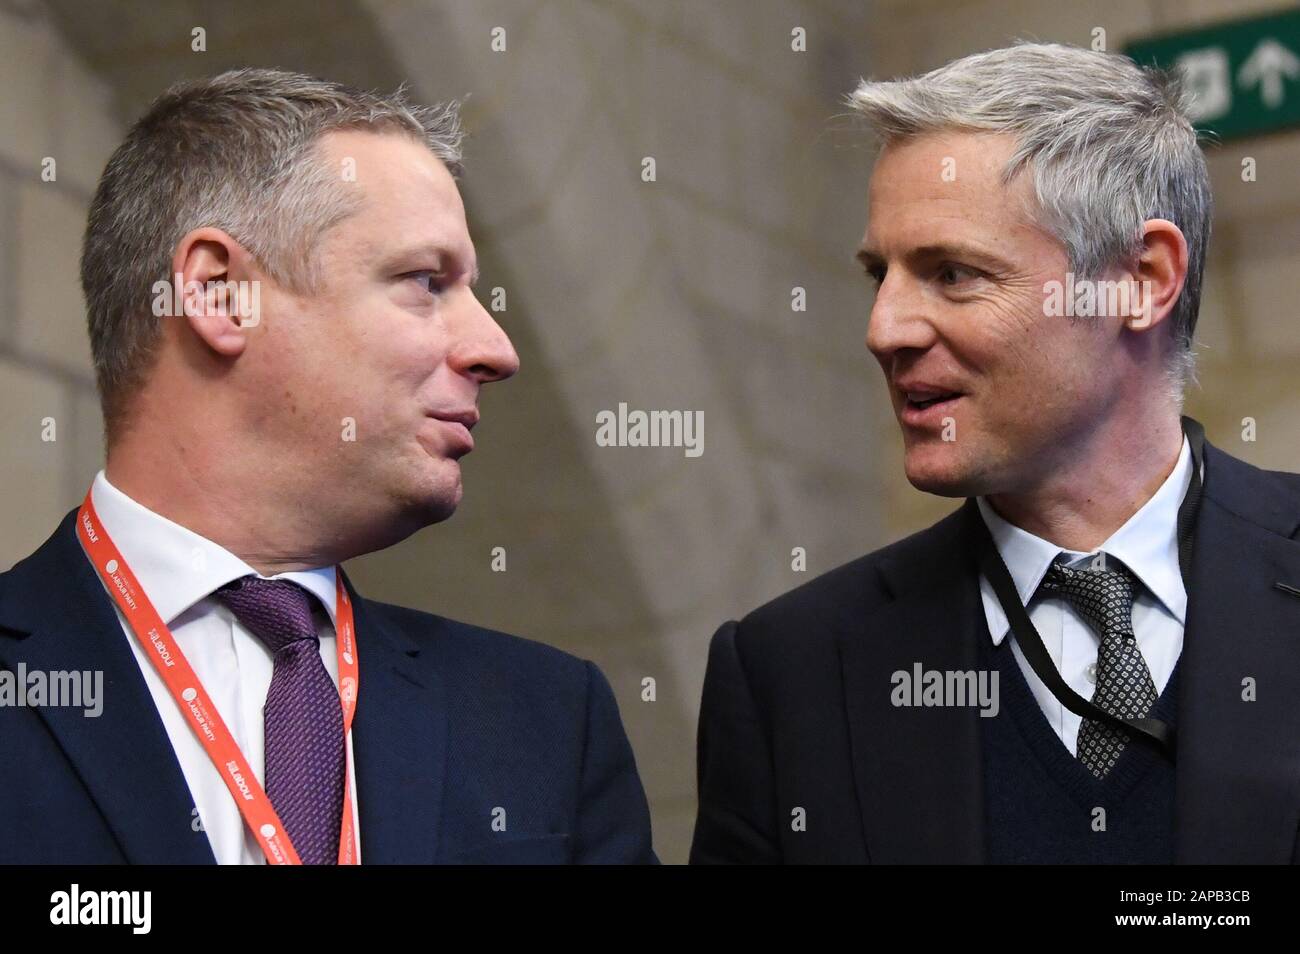 Shadow Envrinoment Secretary Luke Pollard and Defra Minister Lord Zac Goldsmith (right) at the Houses of Parliament in Westminster, London, during an event calling for a ban on trophy hunting imports. Stock Photo